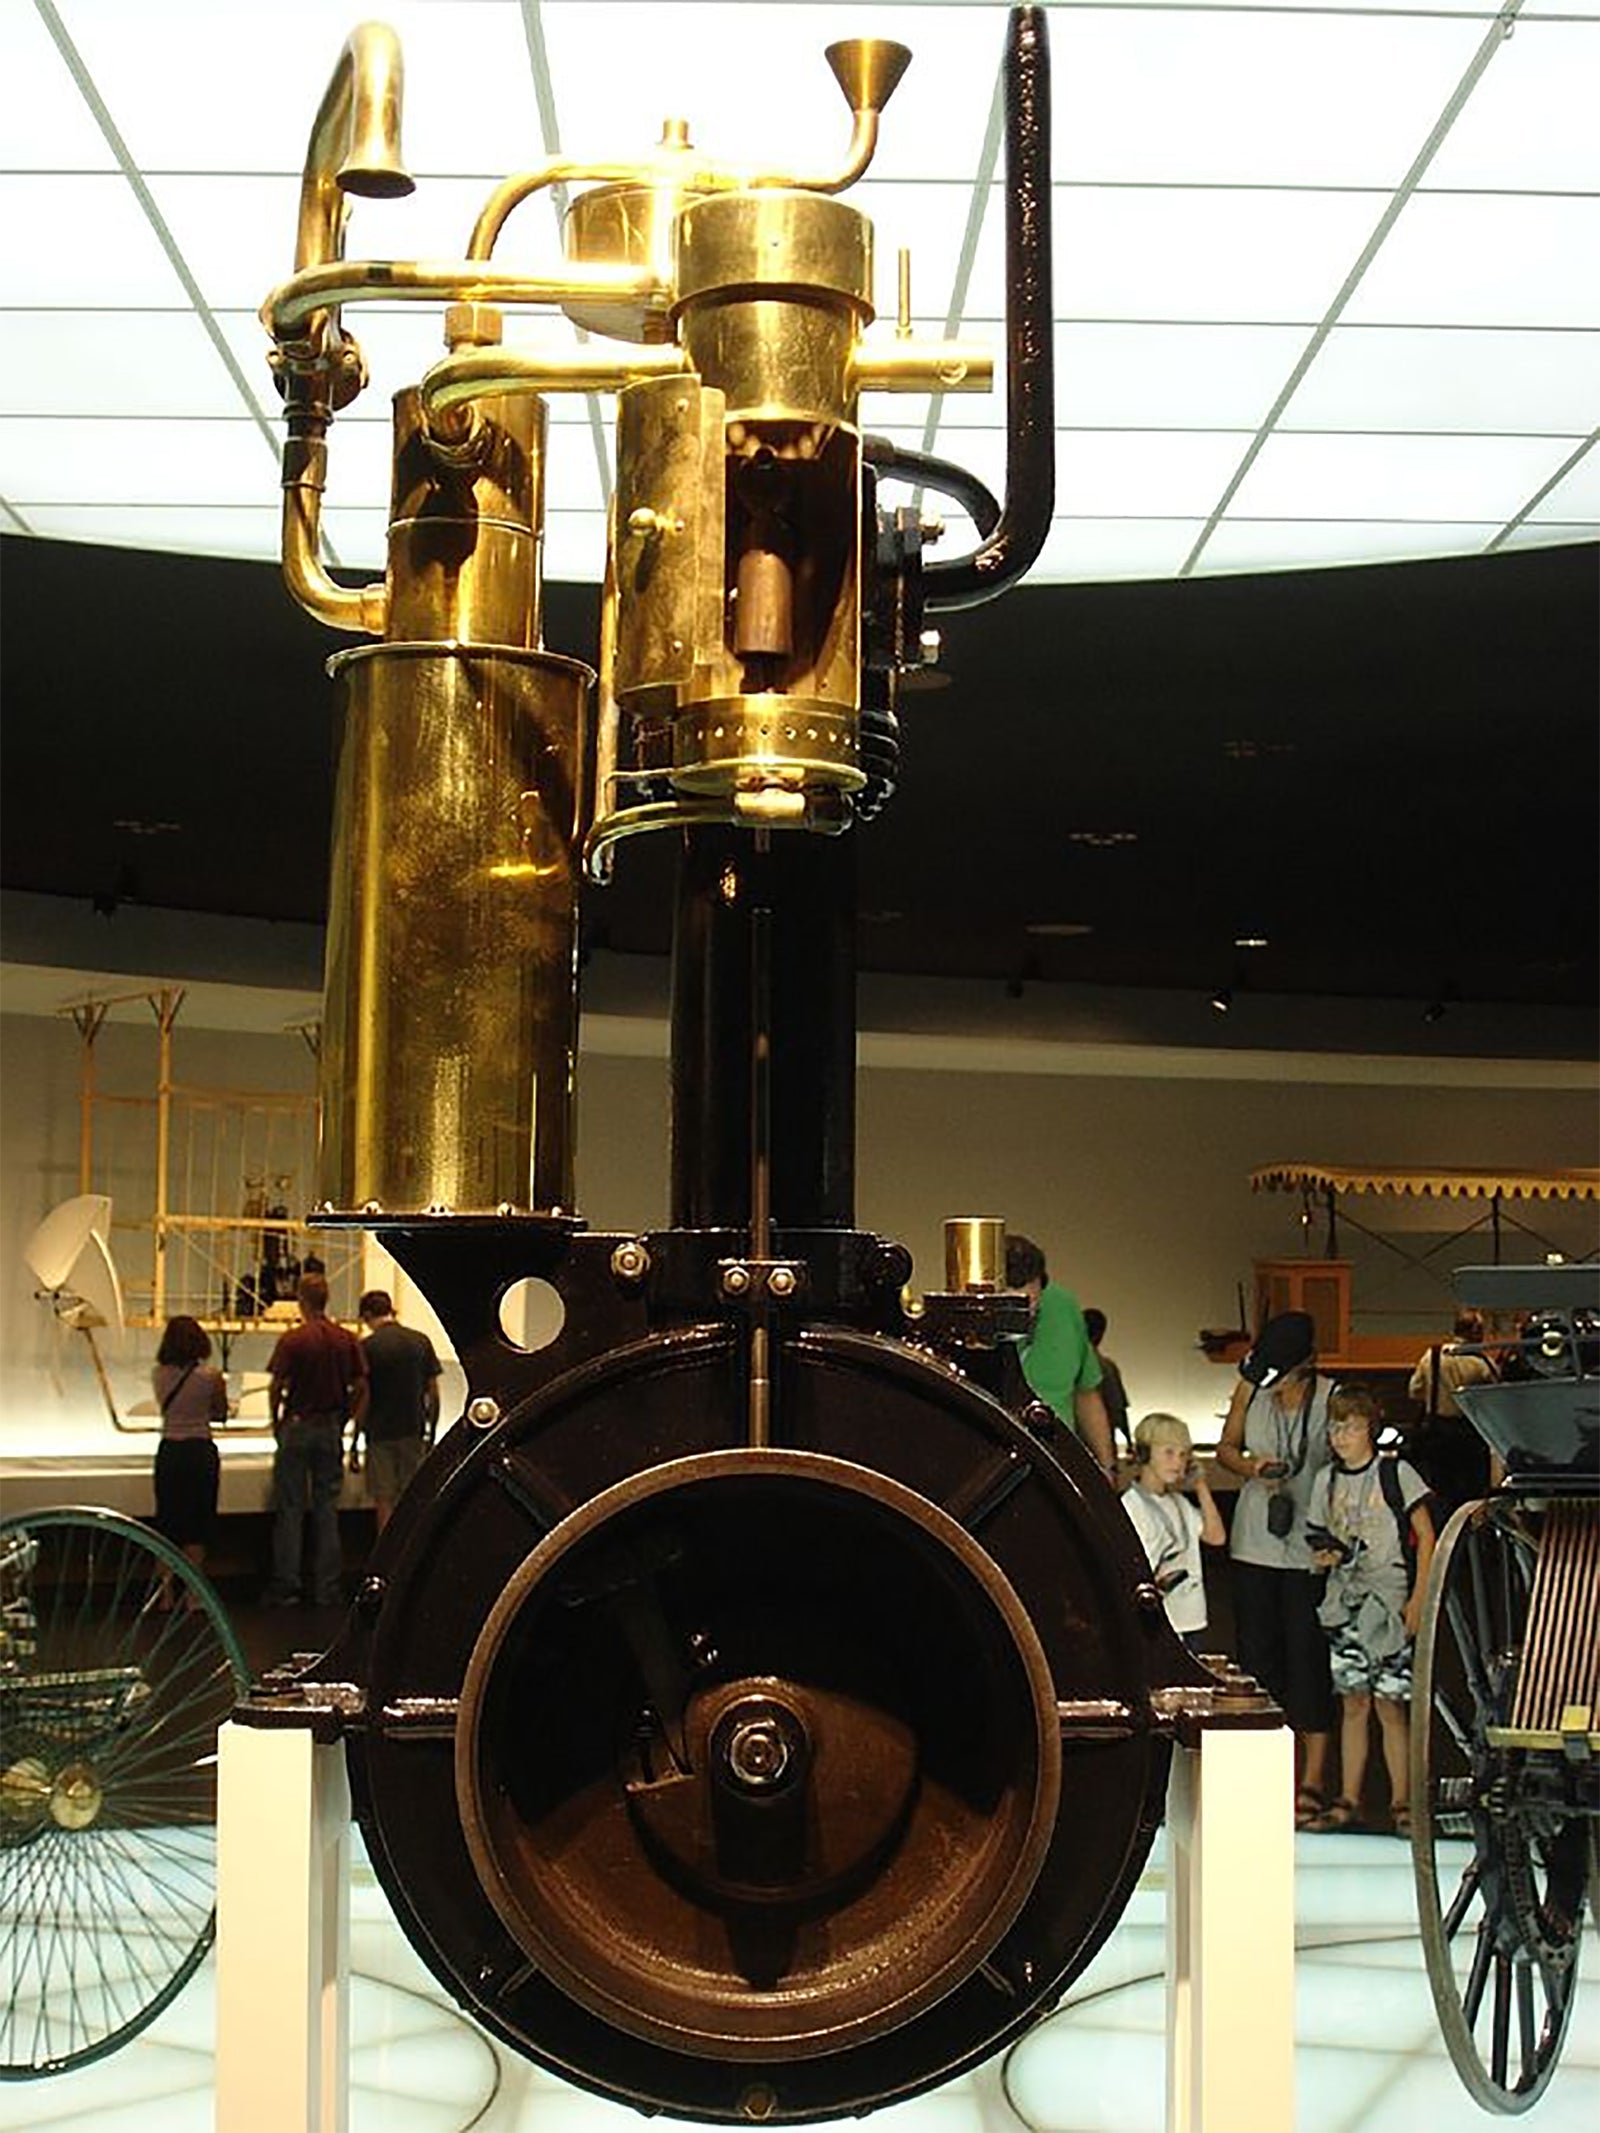 The clock engine of 1886